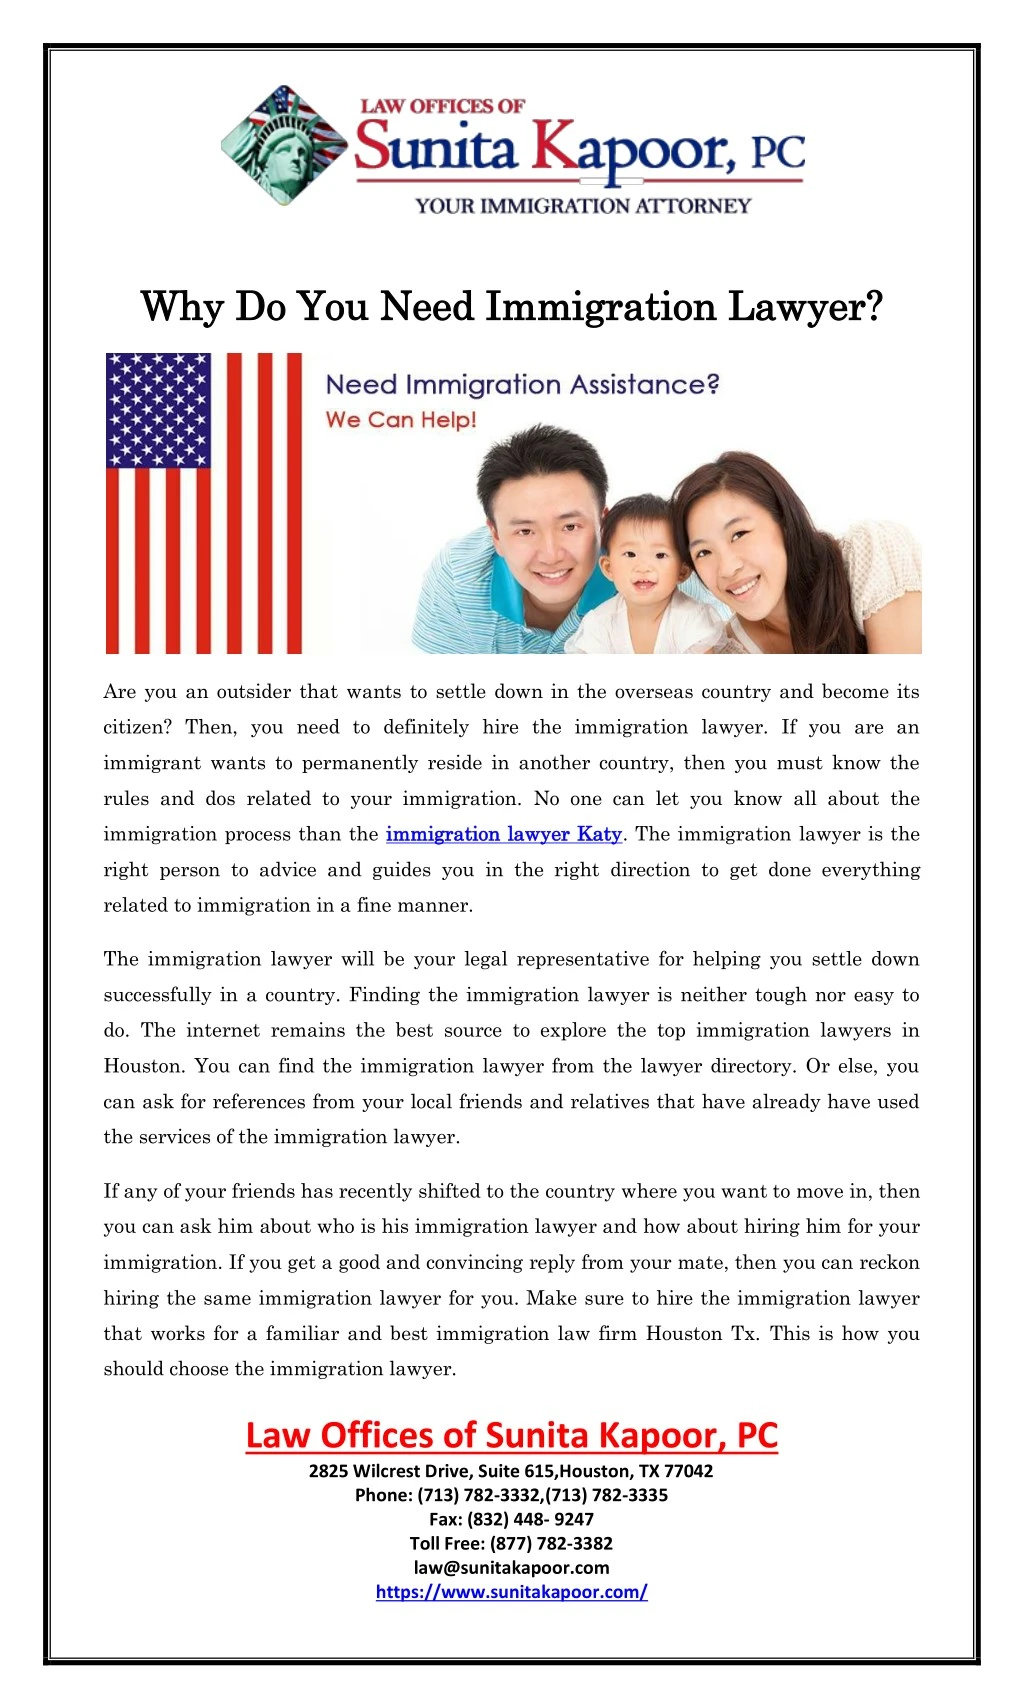 why do you need immigration lawyer